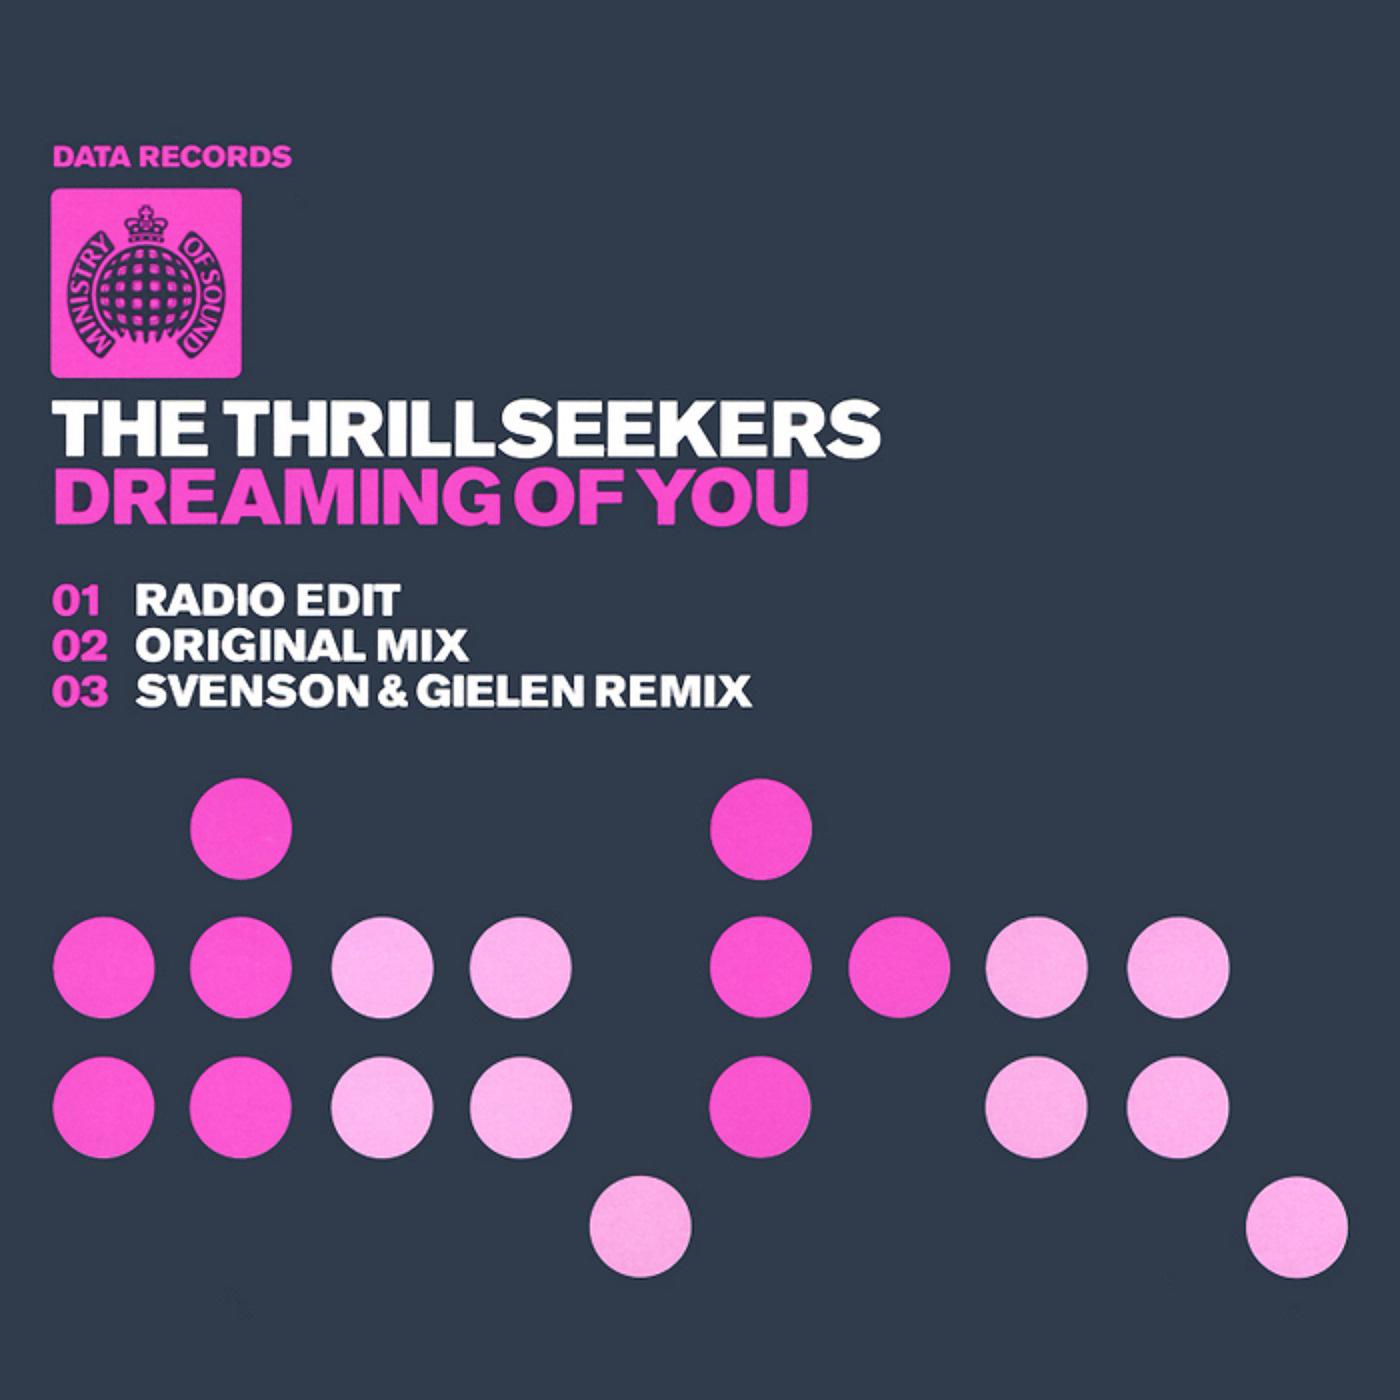 You are original mix. The Thrillseekers. Thrillseekers миксы. The Thrillseekers отзывы. Libra - Dreaming of you.